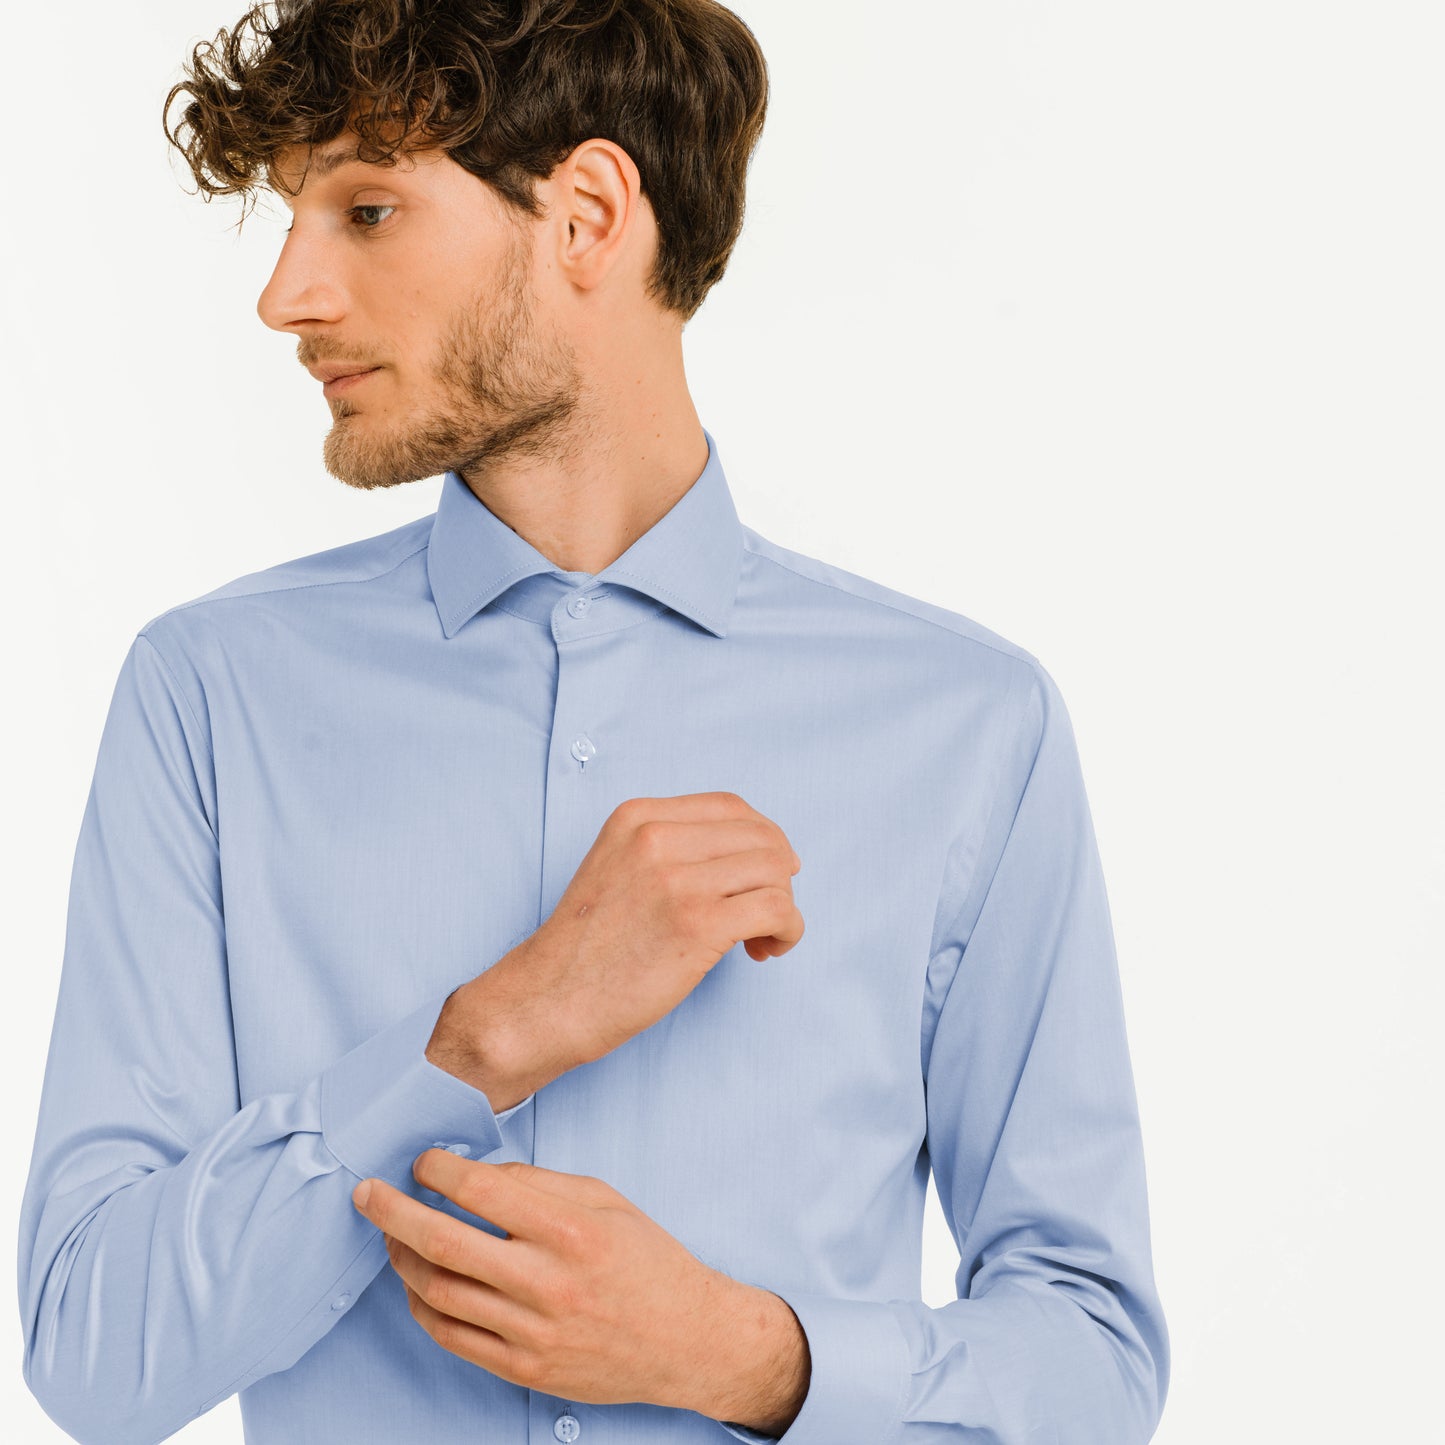 Fitted shirt in blue double-twisted twill